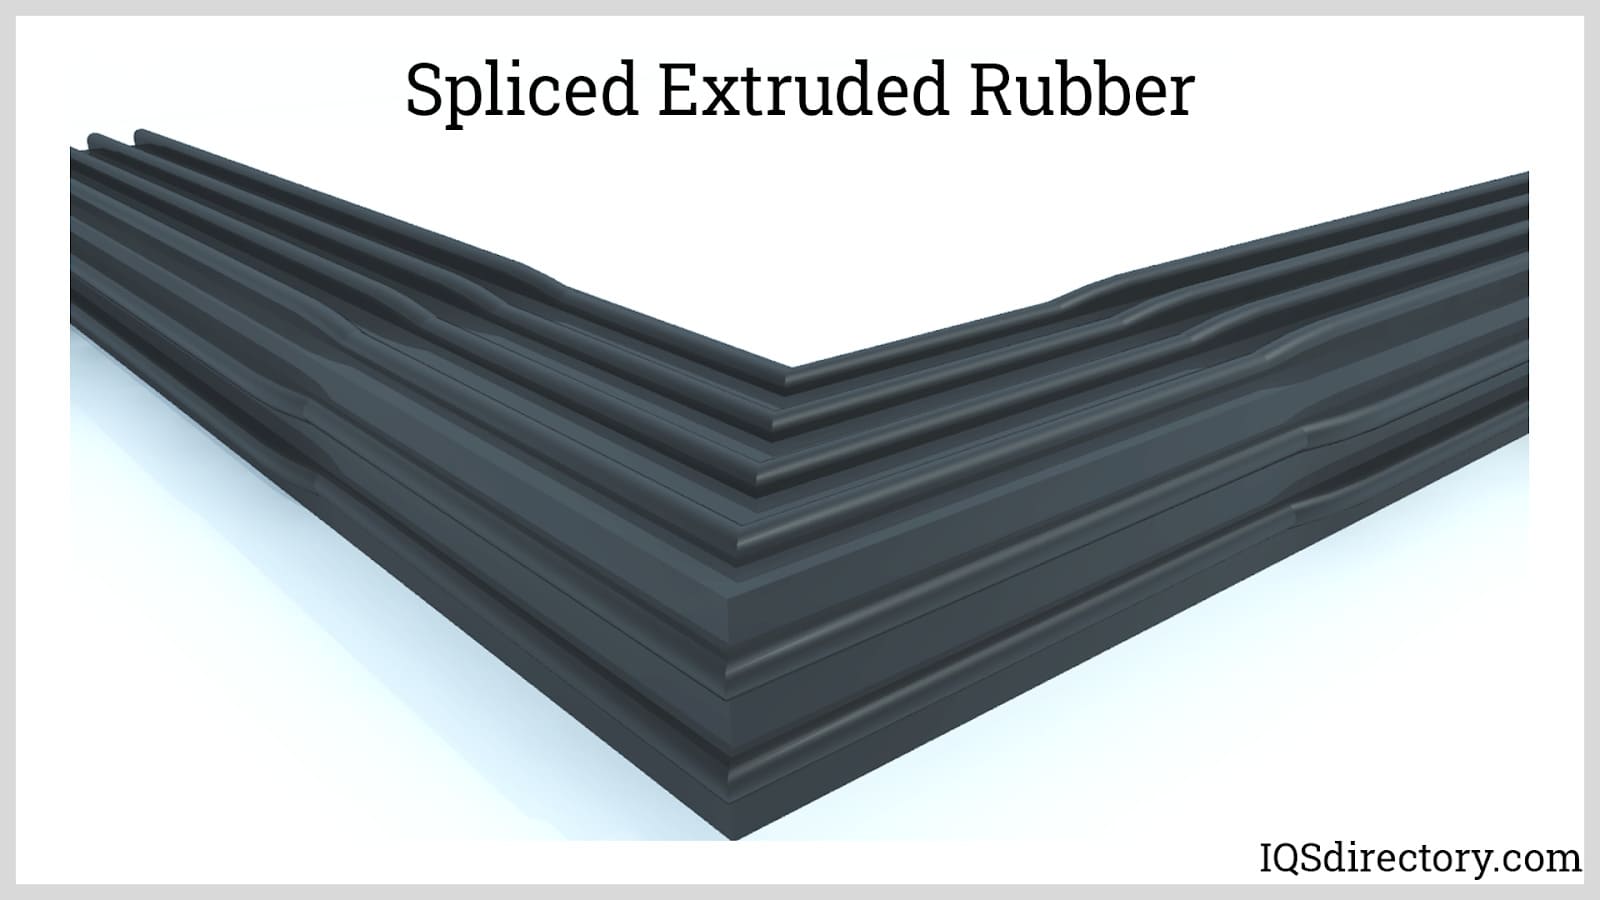 Spliced Extruded Rubber